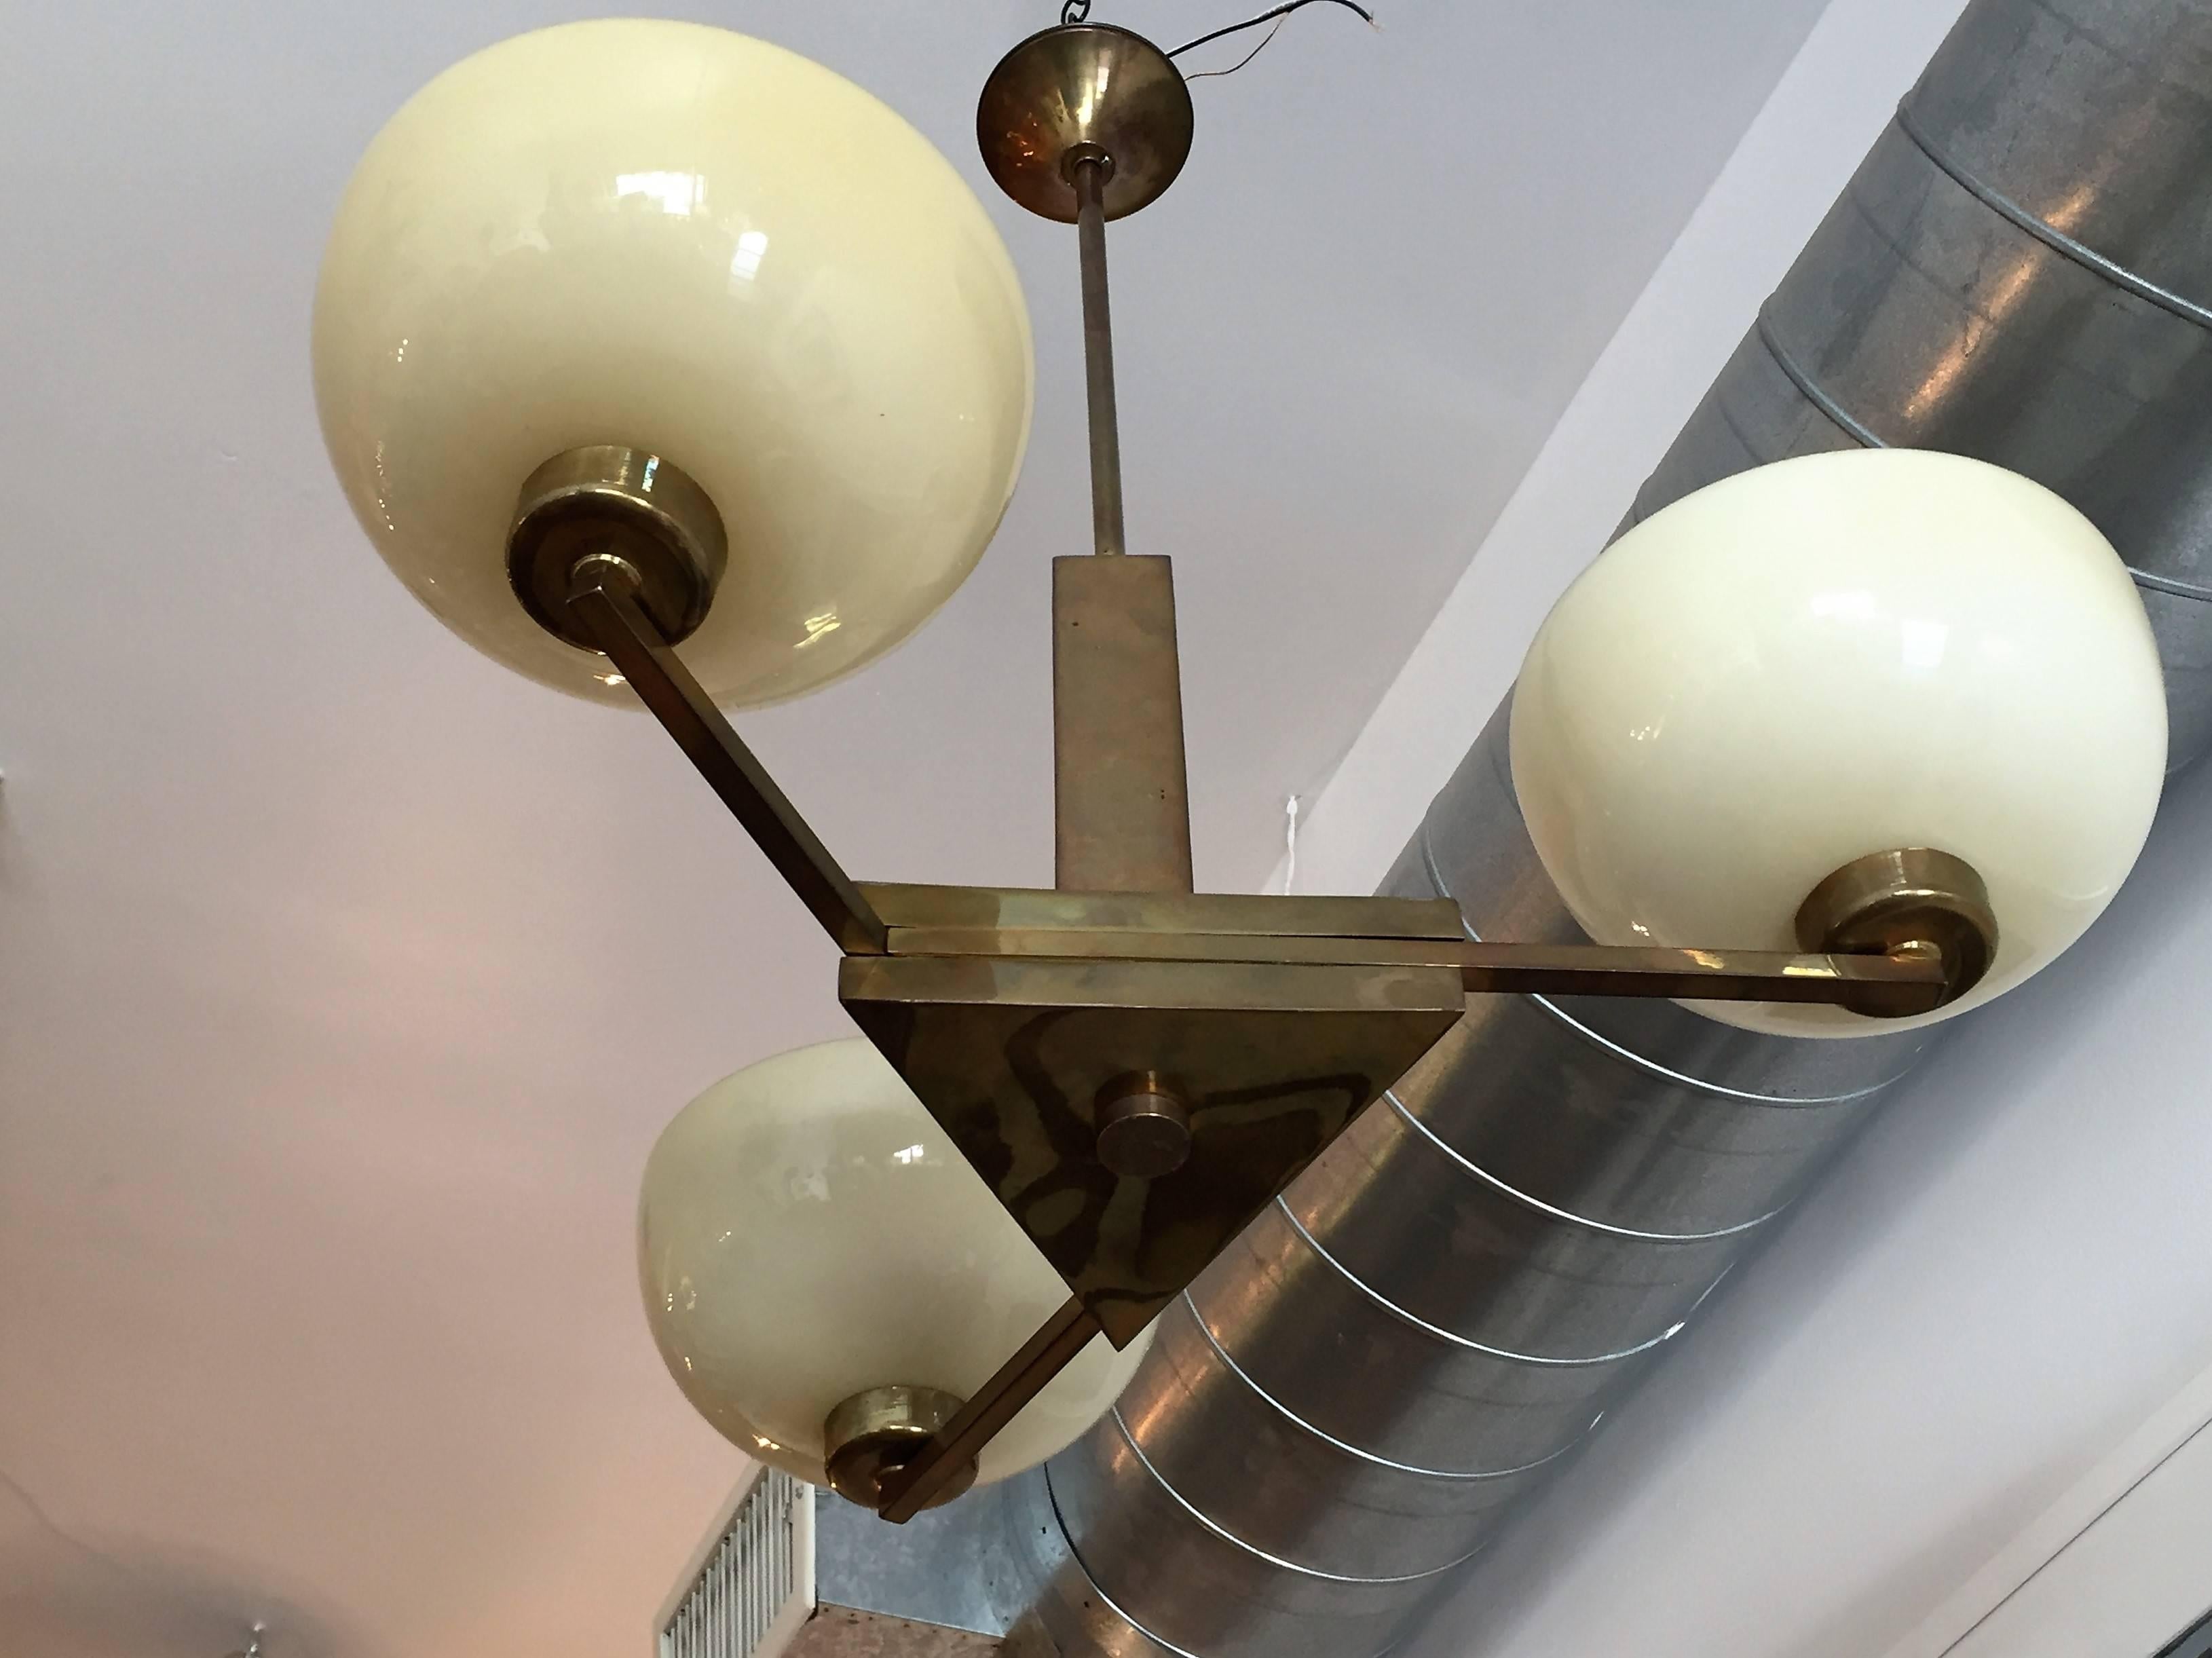 A rare original 1920s German Bauhaus simple modern pendant. The chandelier is composed of an aged polished brass triangular body with three straight rectangular arms holding large light custard glass bowl shades. Newly rewired.